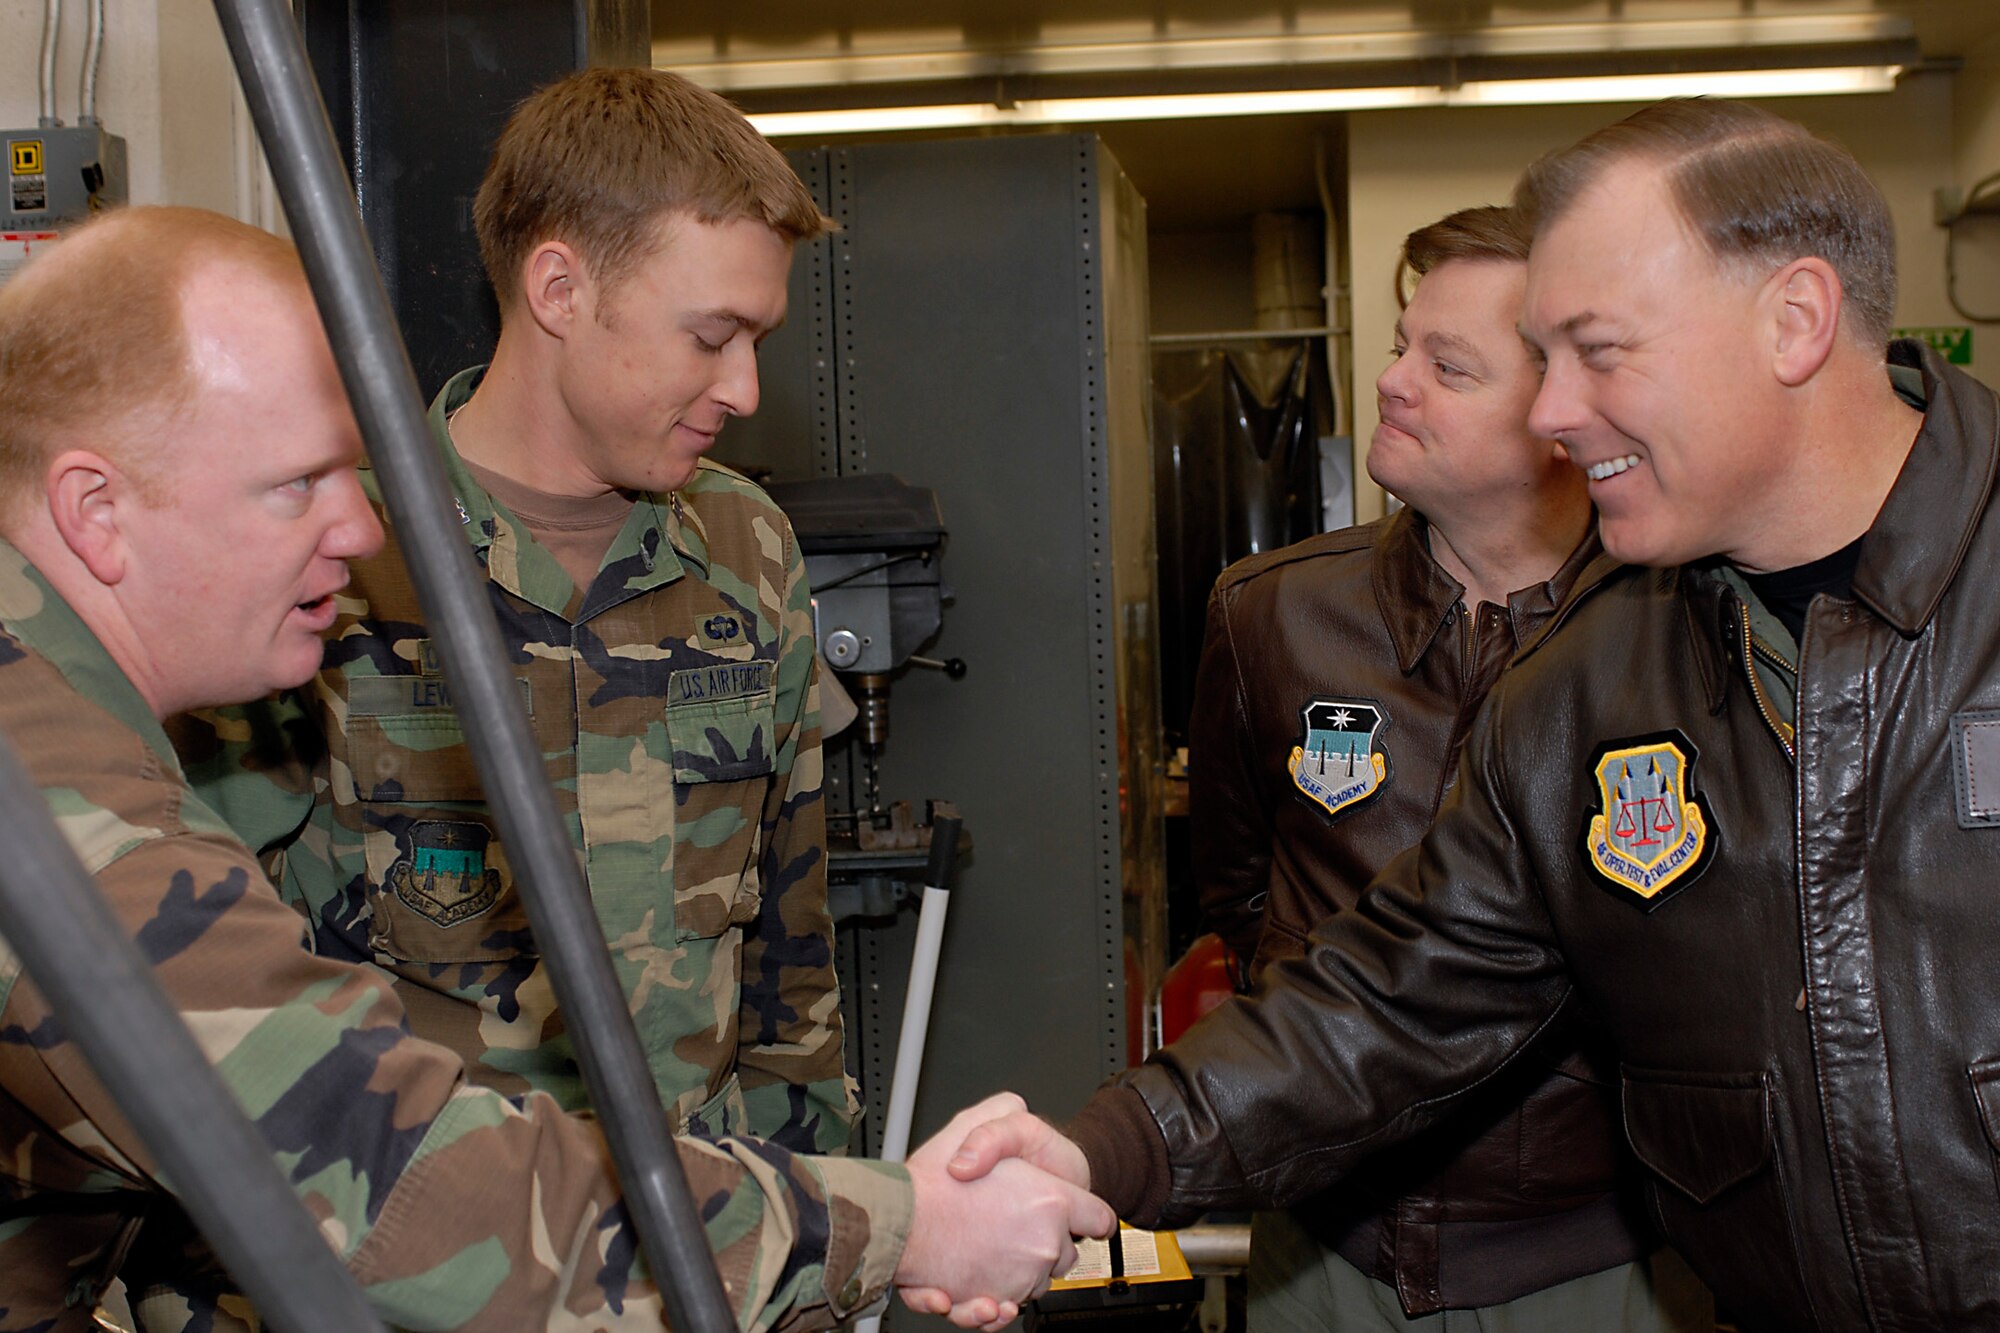 (Right) Maj. Gen. Stephen T. Sargeant, Air Force Operational Test and Evaluation Center Commander, meets and visits with U.S. Air Force Academy cadets during a March 17, 2008 visit that included a tour of Academy astronautics classes and laboratories.